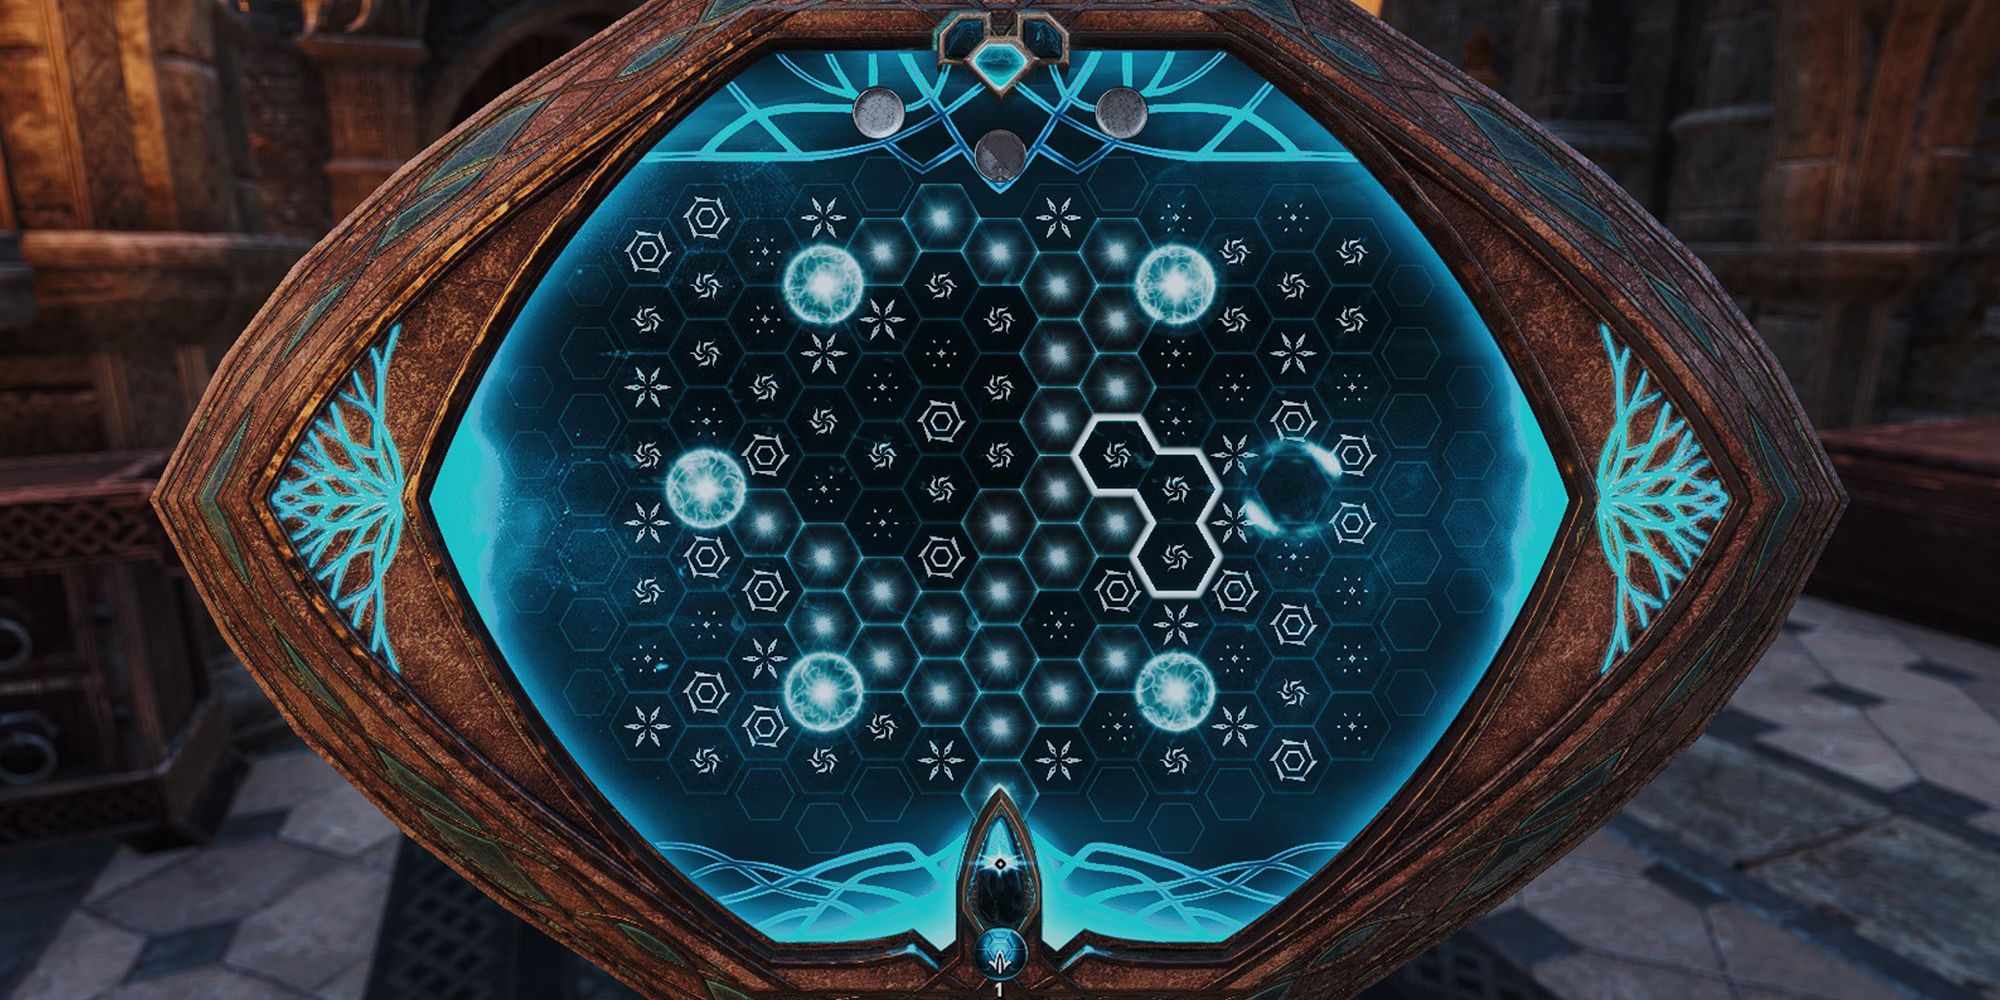 ESO Scry Minigame Puzzle With Hexagons Leading Toward Lit Up Circles